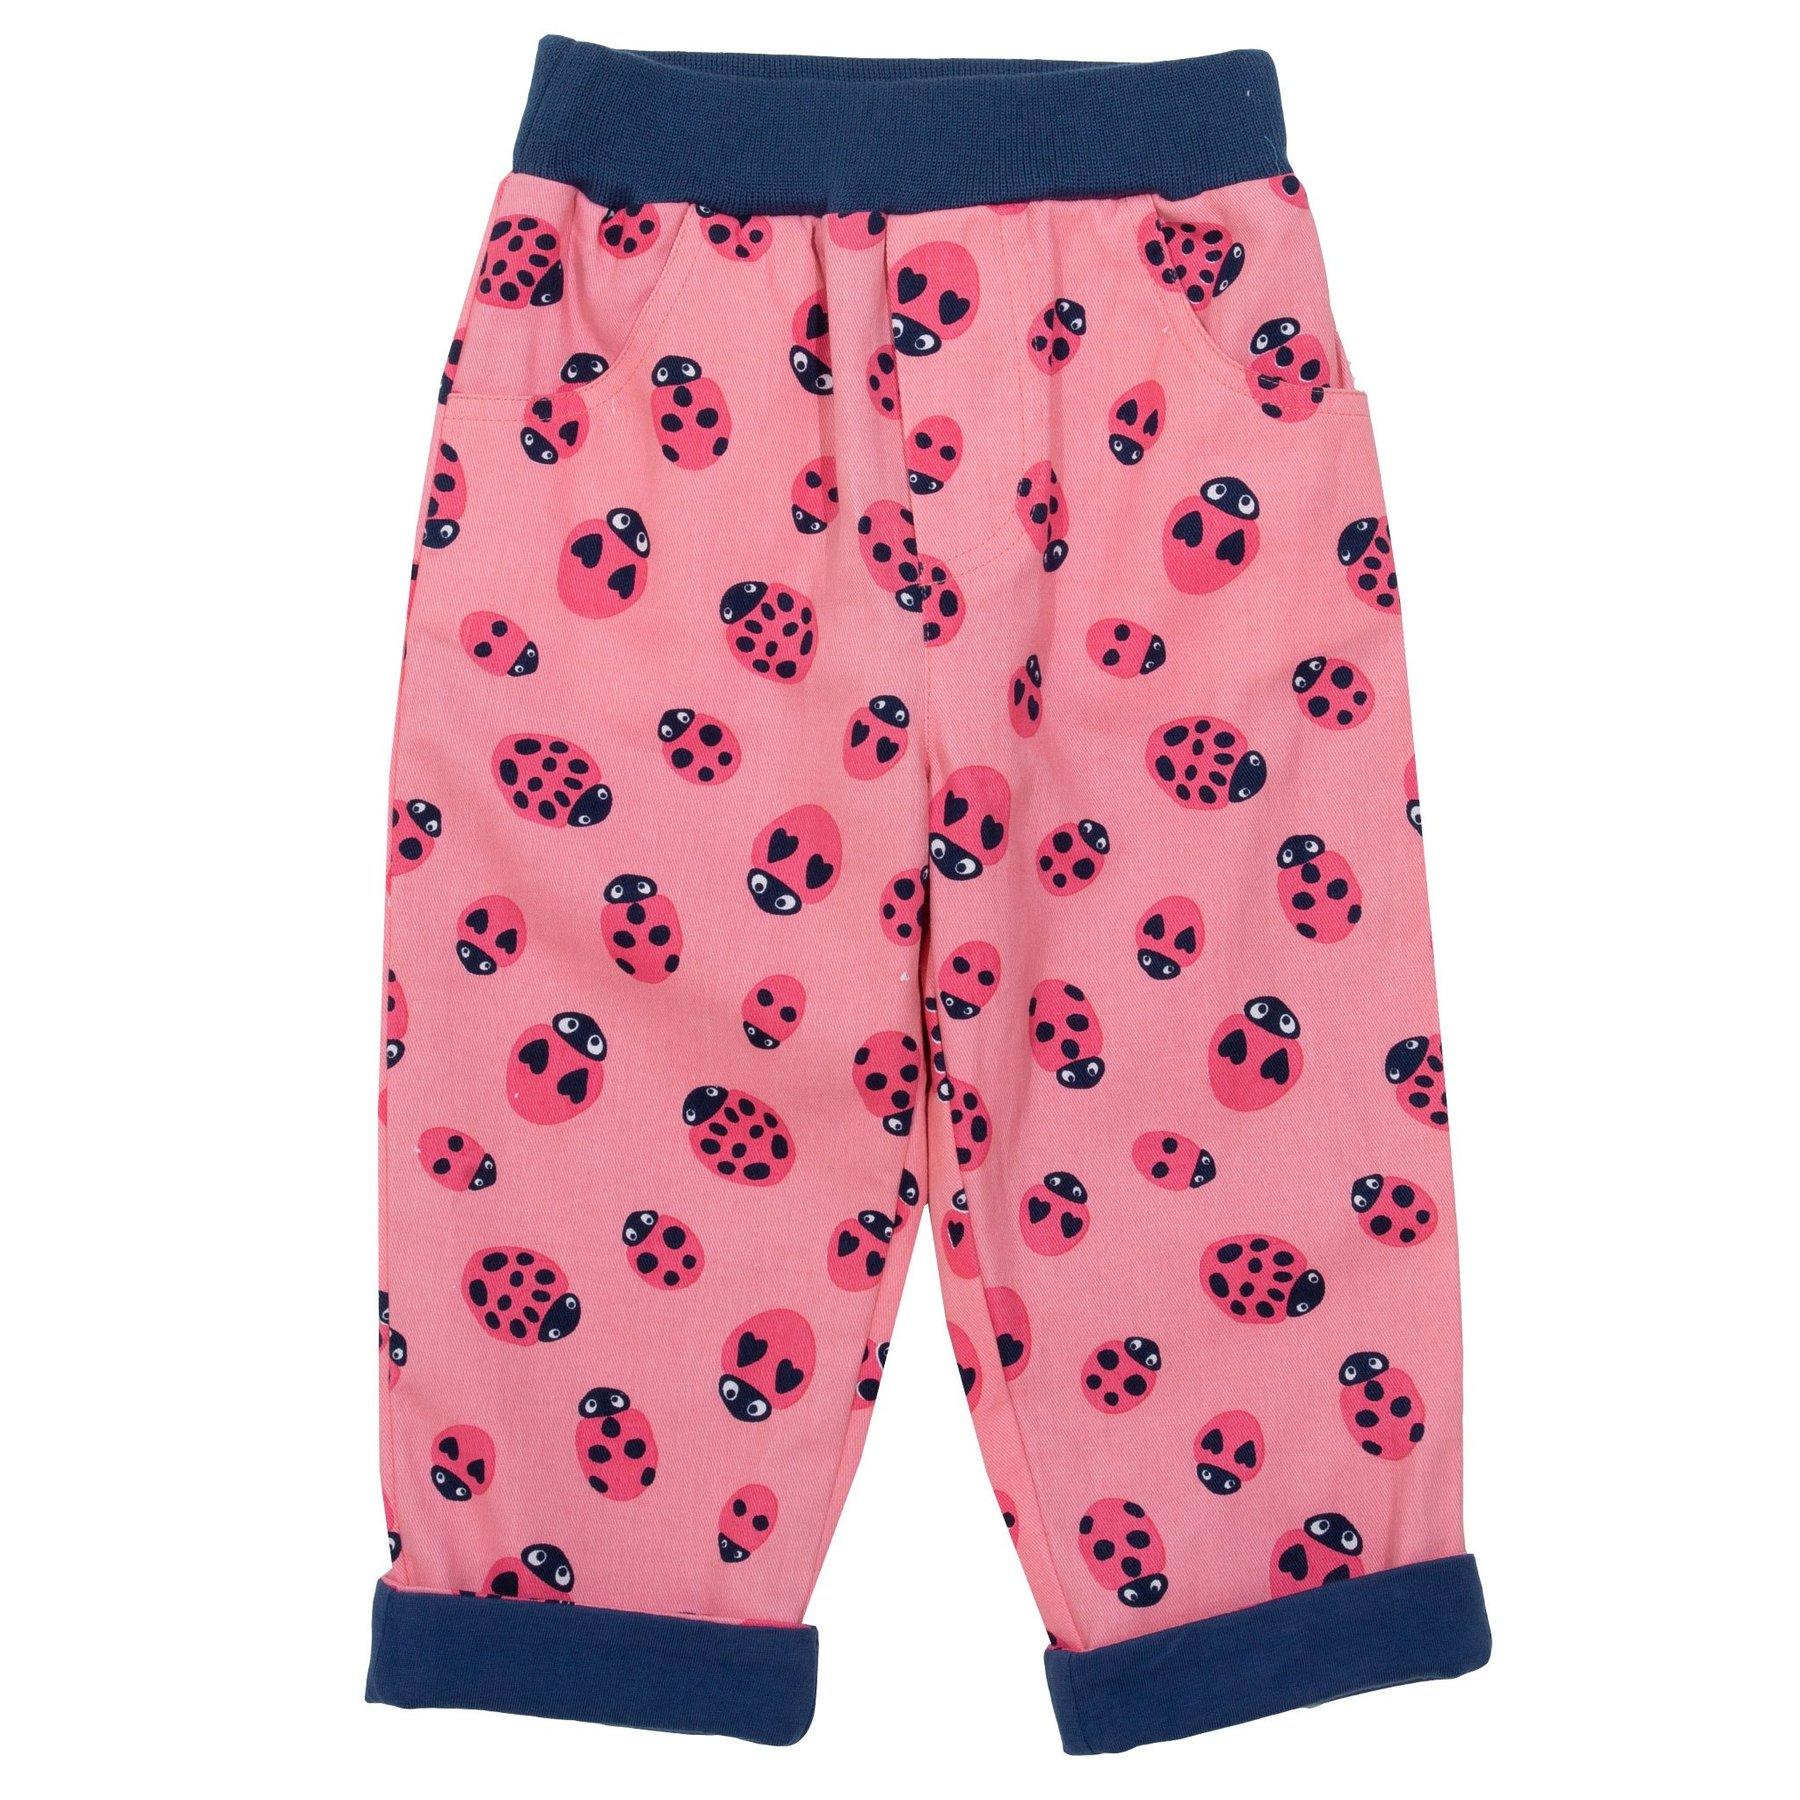 Kite Clothing Ladybird Pull Ups front